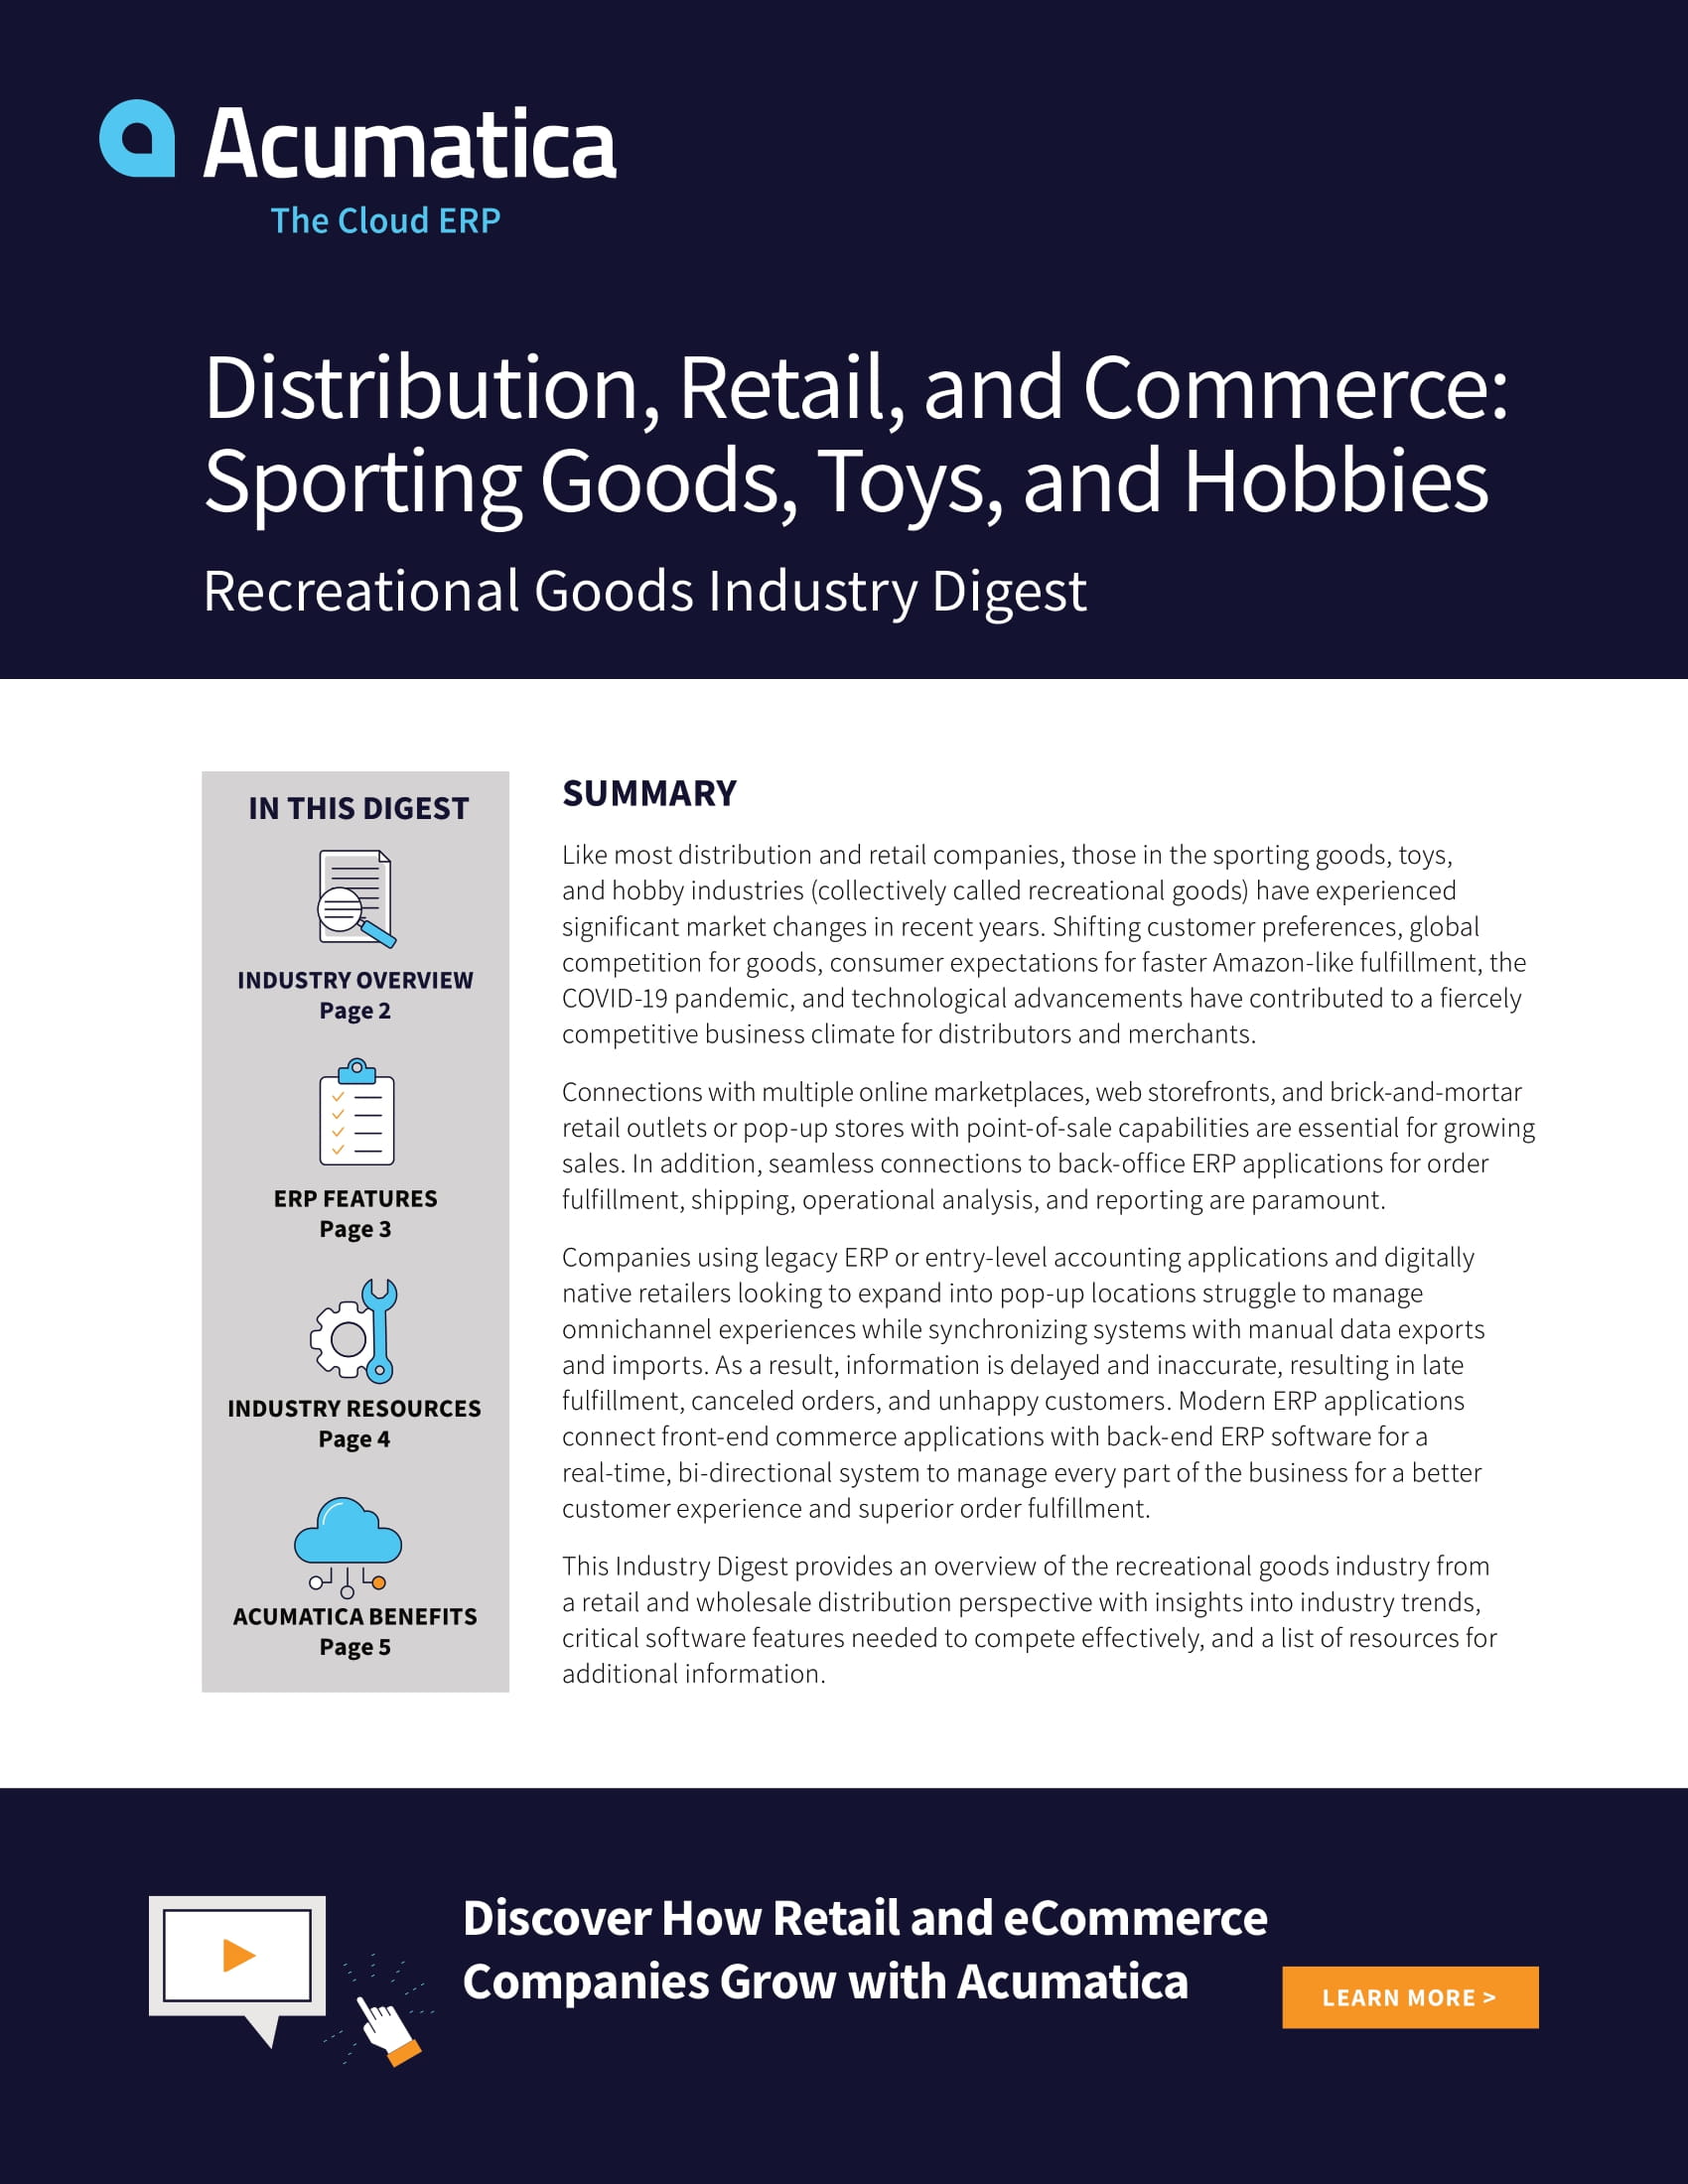 Modern ERP Applications A Must for Businesses In The Recreational Goods Industry 